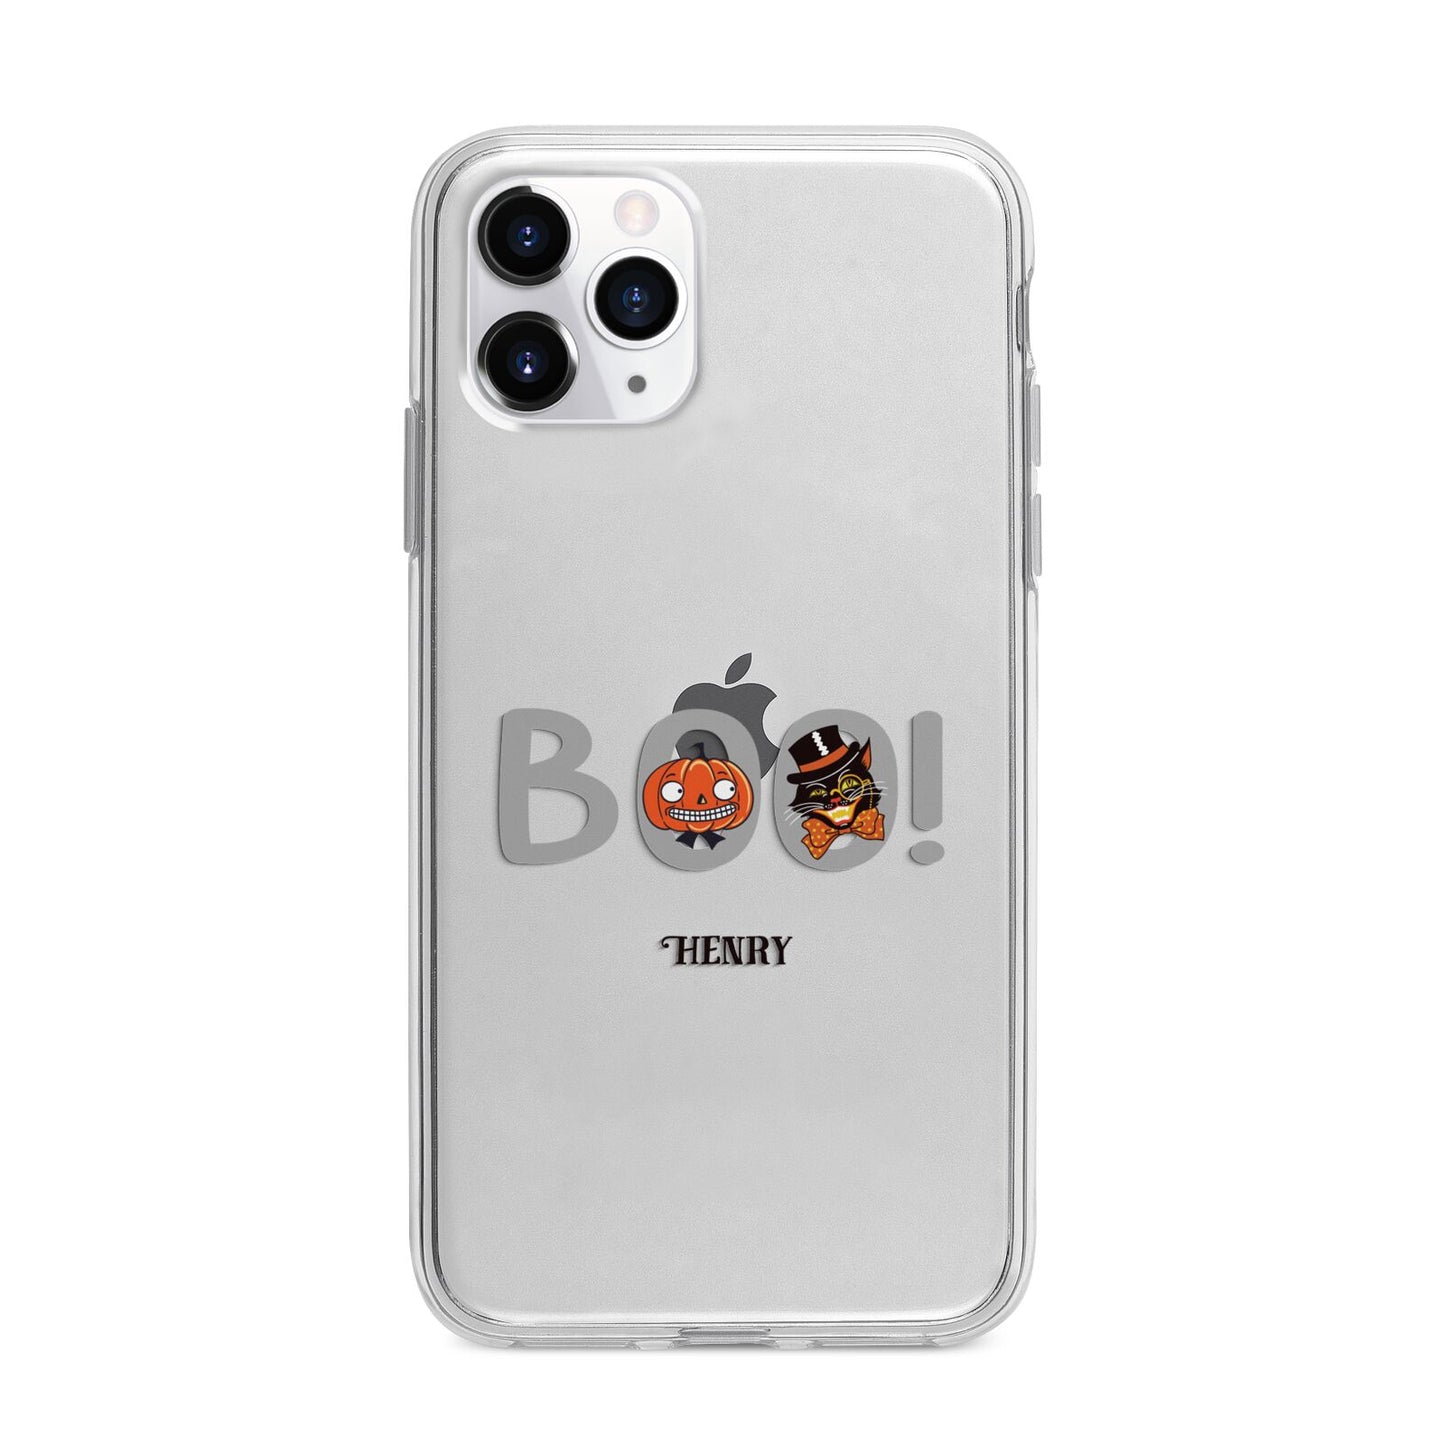 Boo Personalised Apple iPhone 11 Pro Max in Silver with Bumper Case